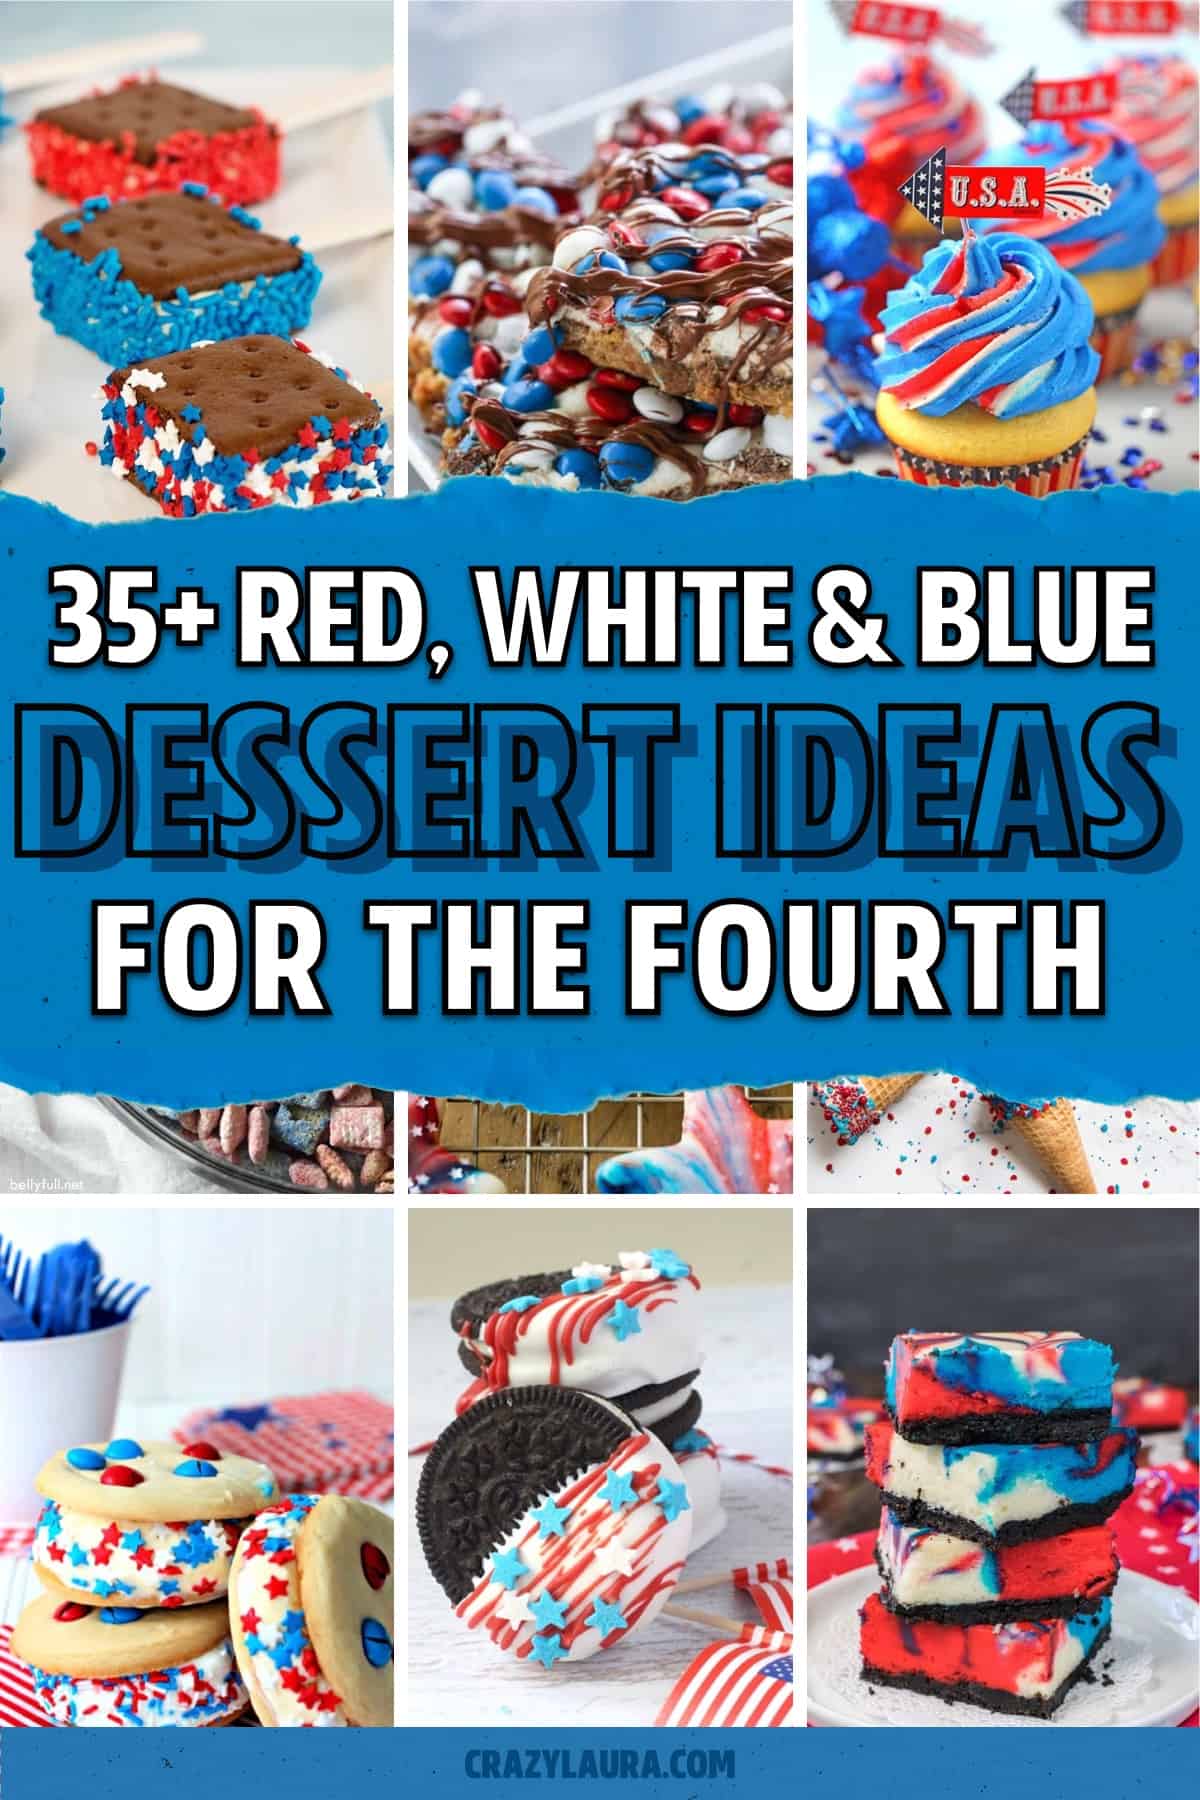 desserts for the fourth